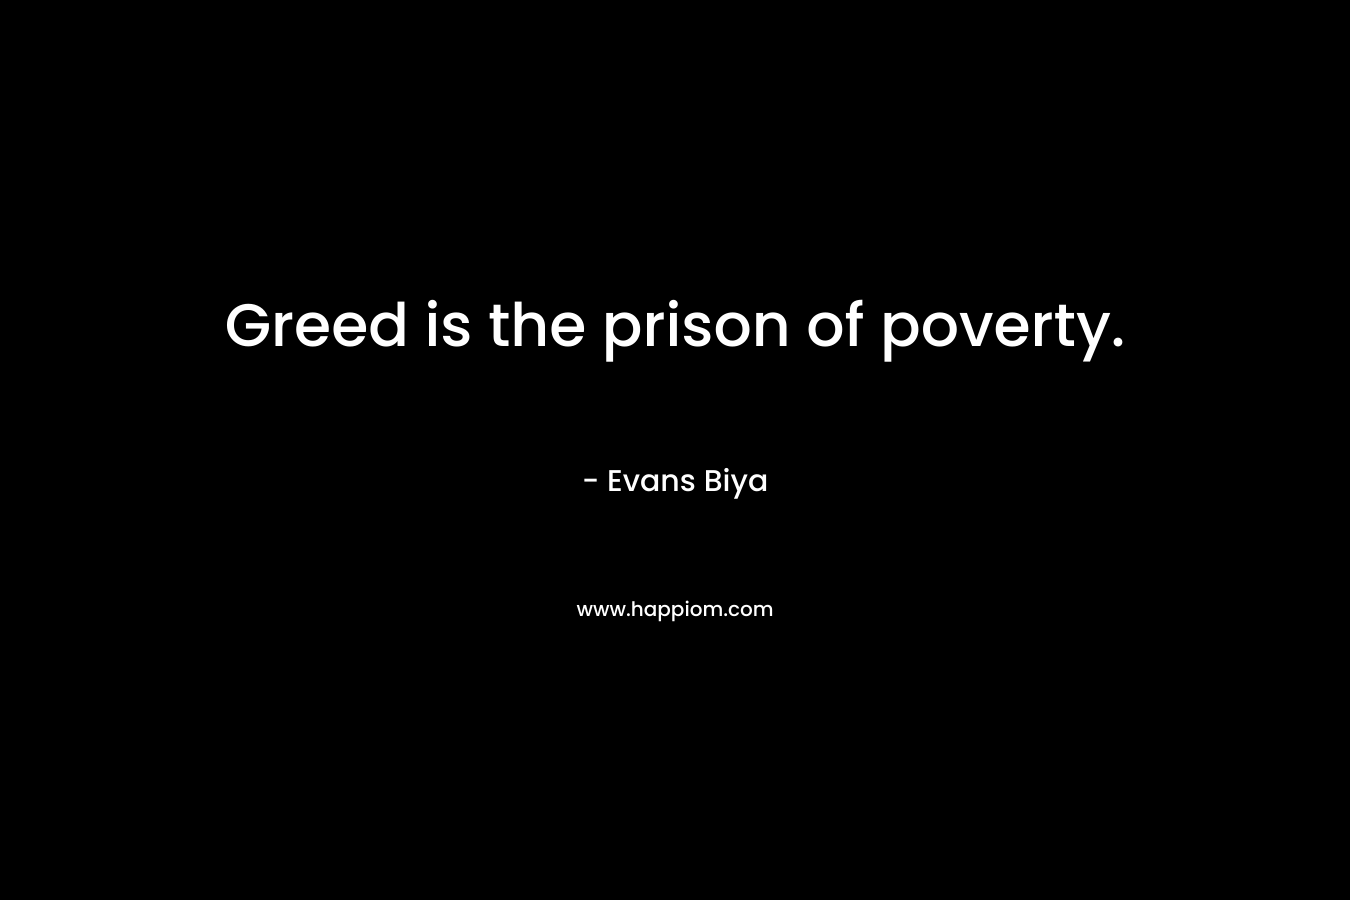 Greed is the prison of poverty.